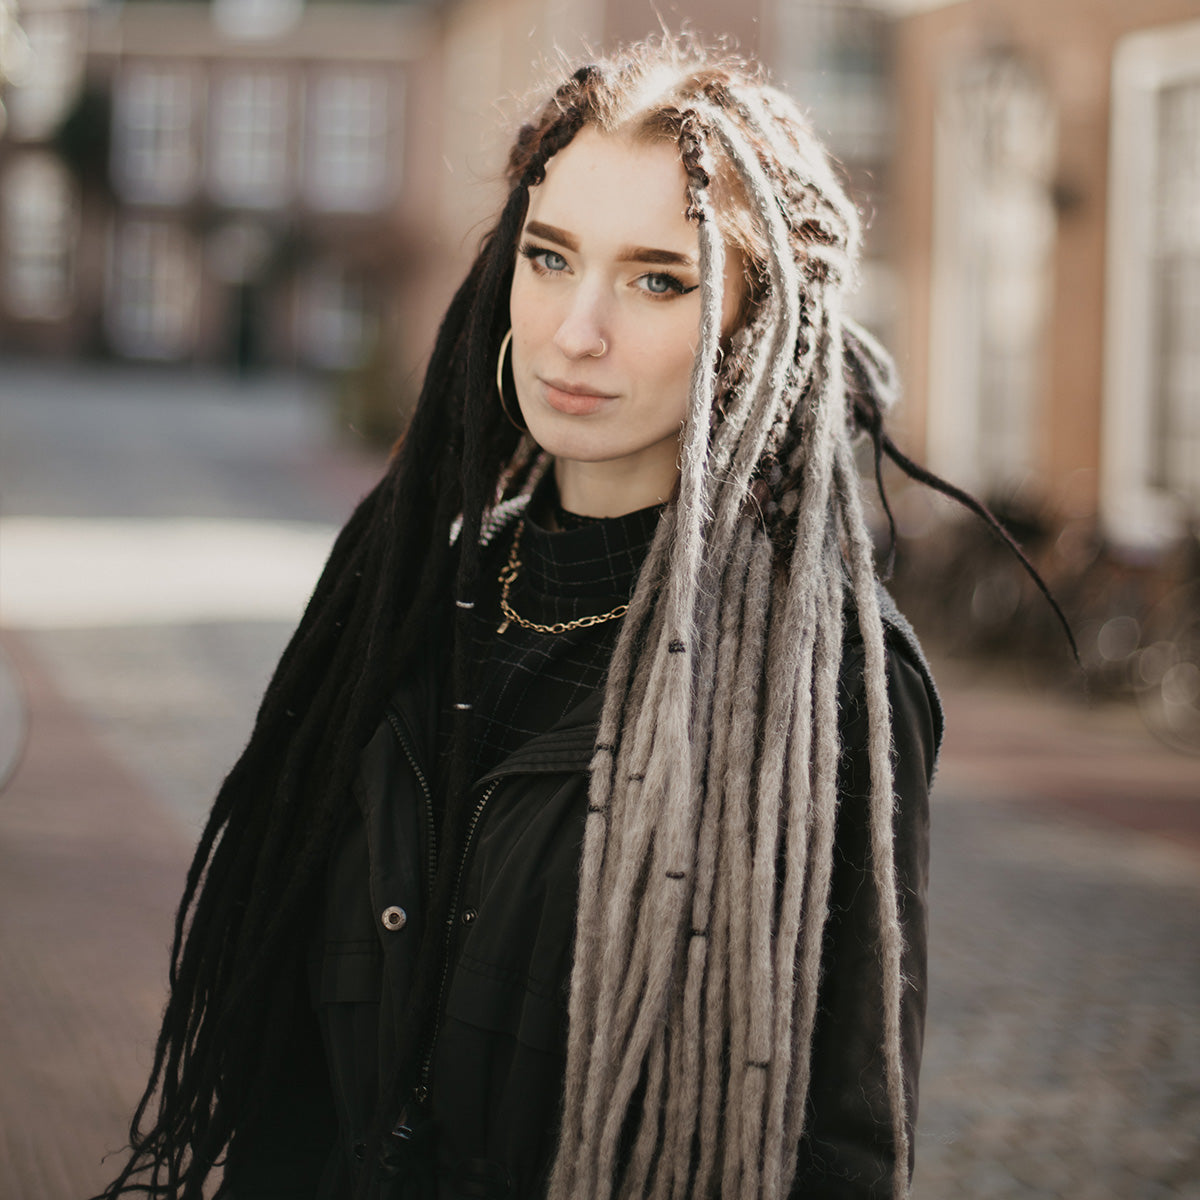 ARE YOU ALSO GOING FOR A SPLIT HAIRSTYLE WITH YOUR SYNTHETIC DREADS